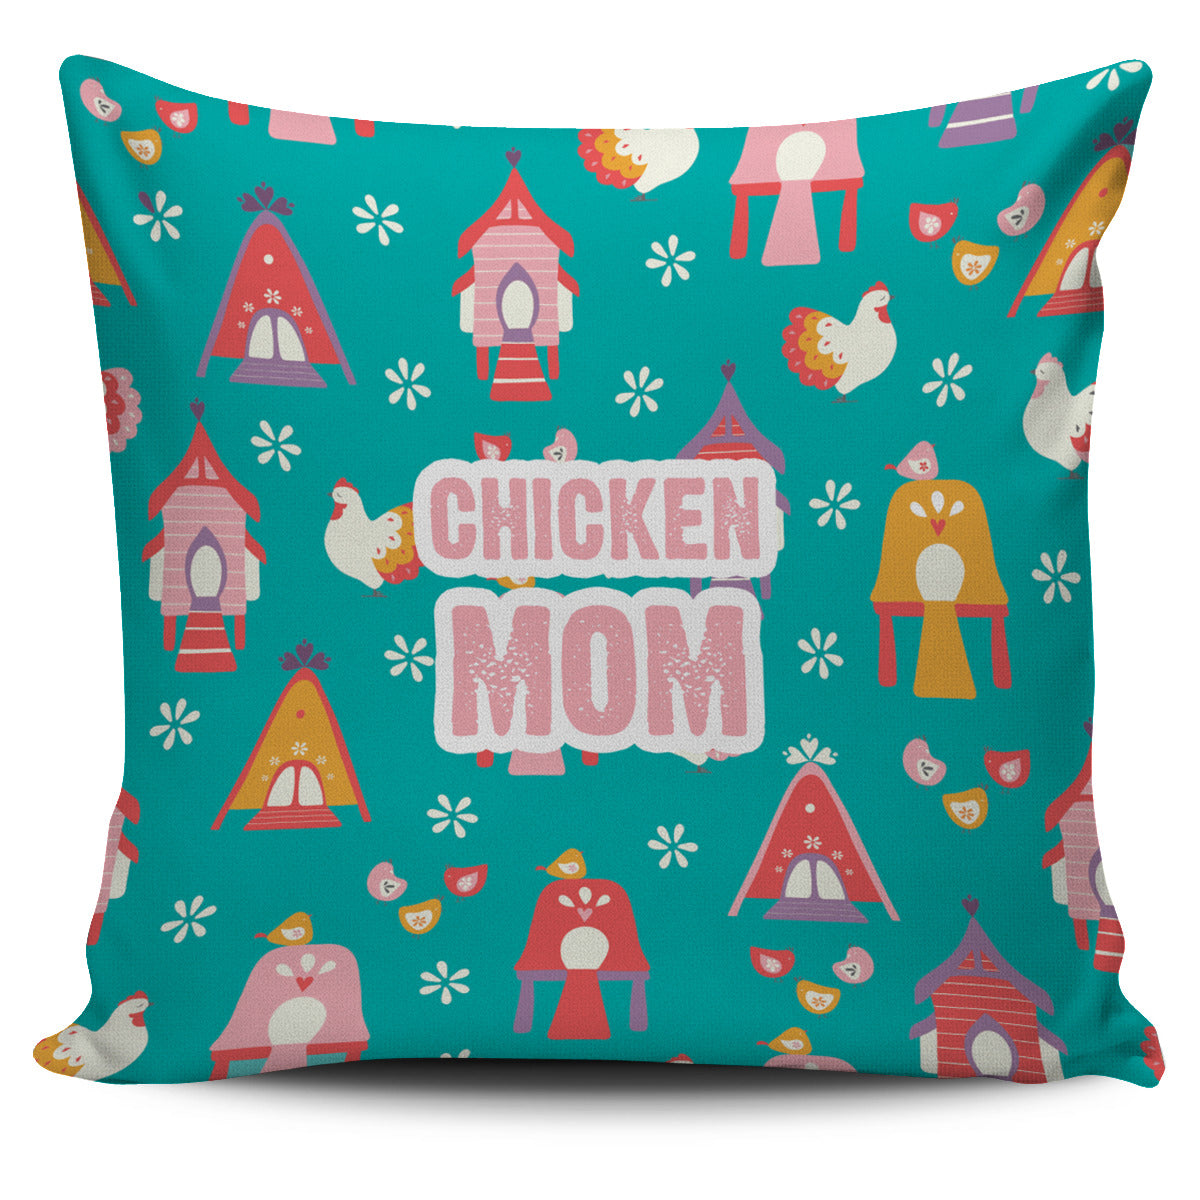 Chicken Mom Pillow Cover